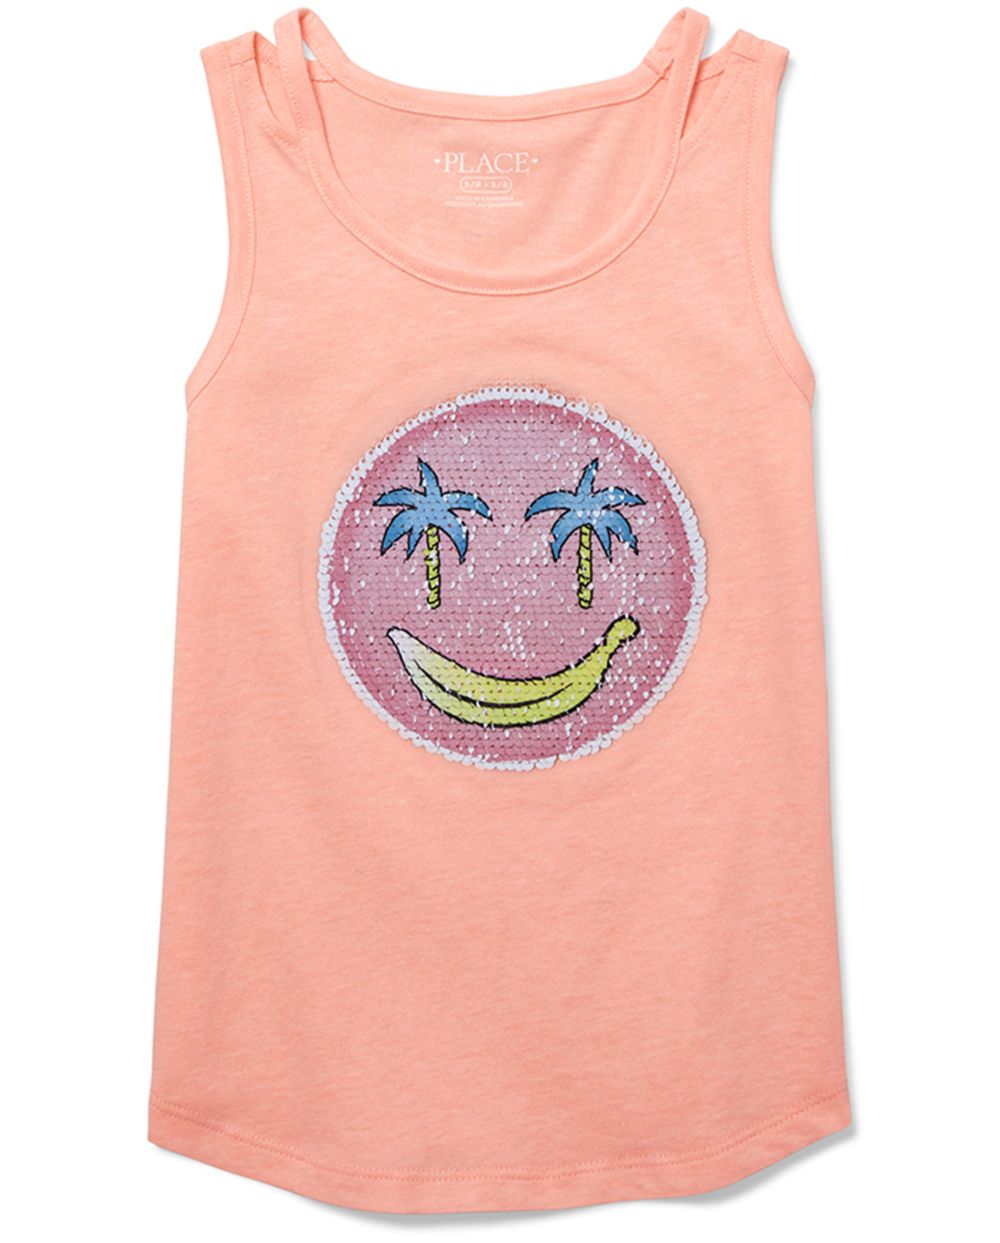 Girls Flip Sequin Graphic Cut Out Tank Top